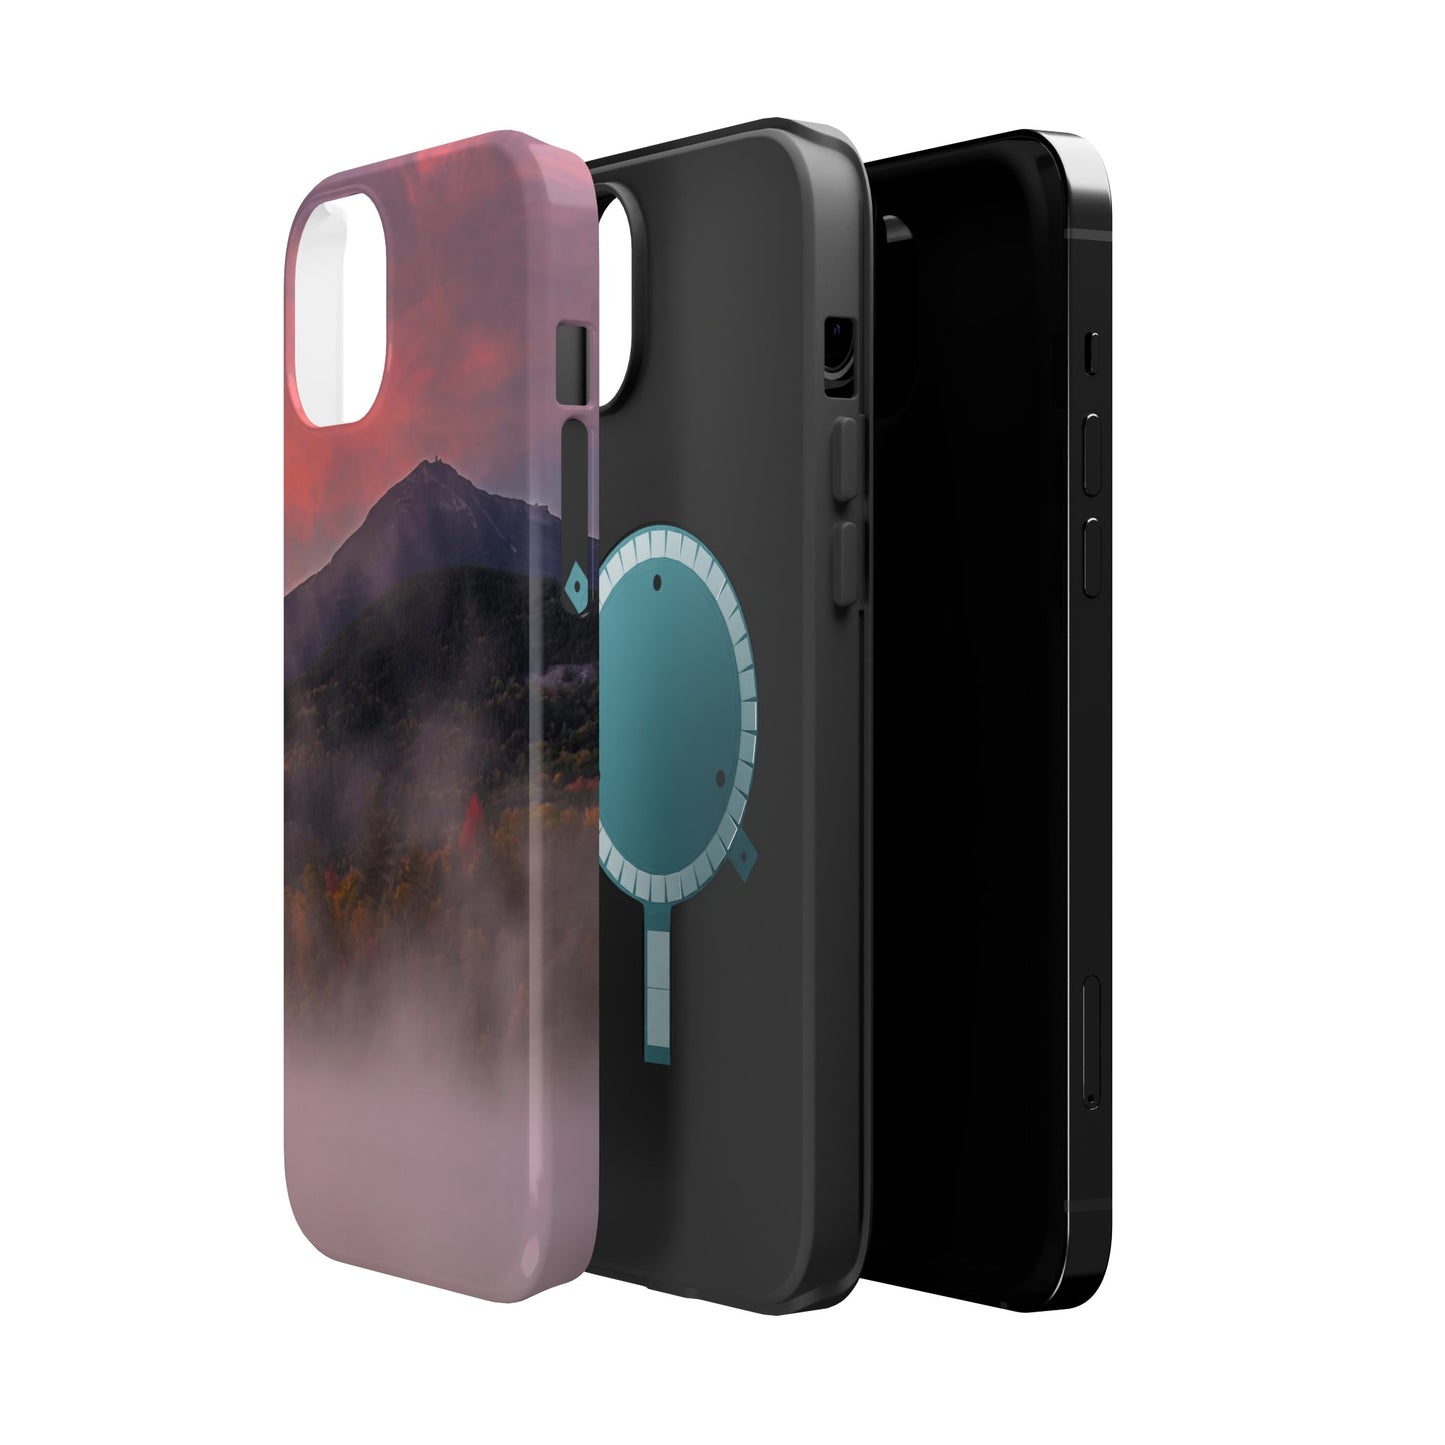 MagSafe Impact Resistant Phone Case - Dreamy Autumn Morning